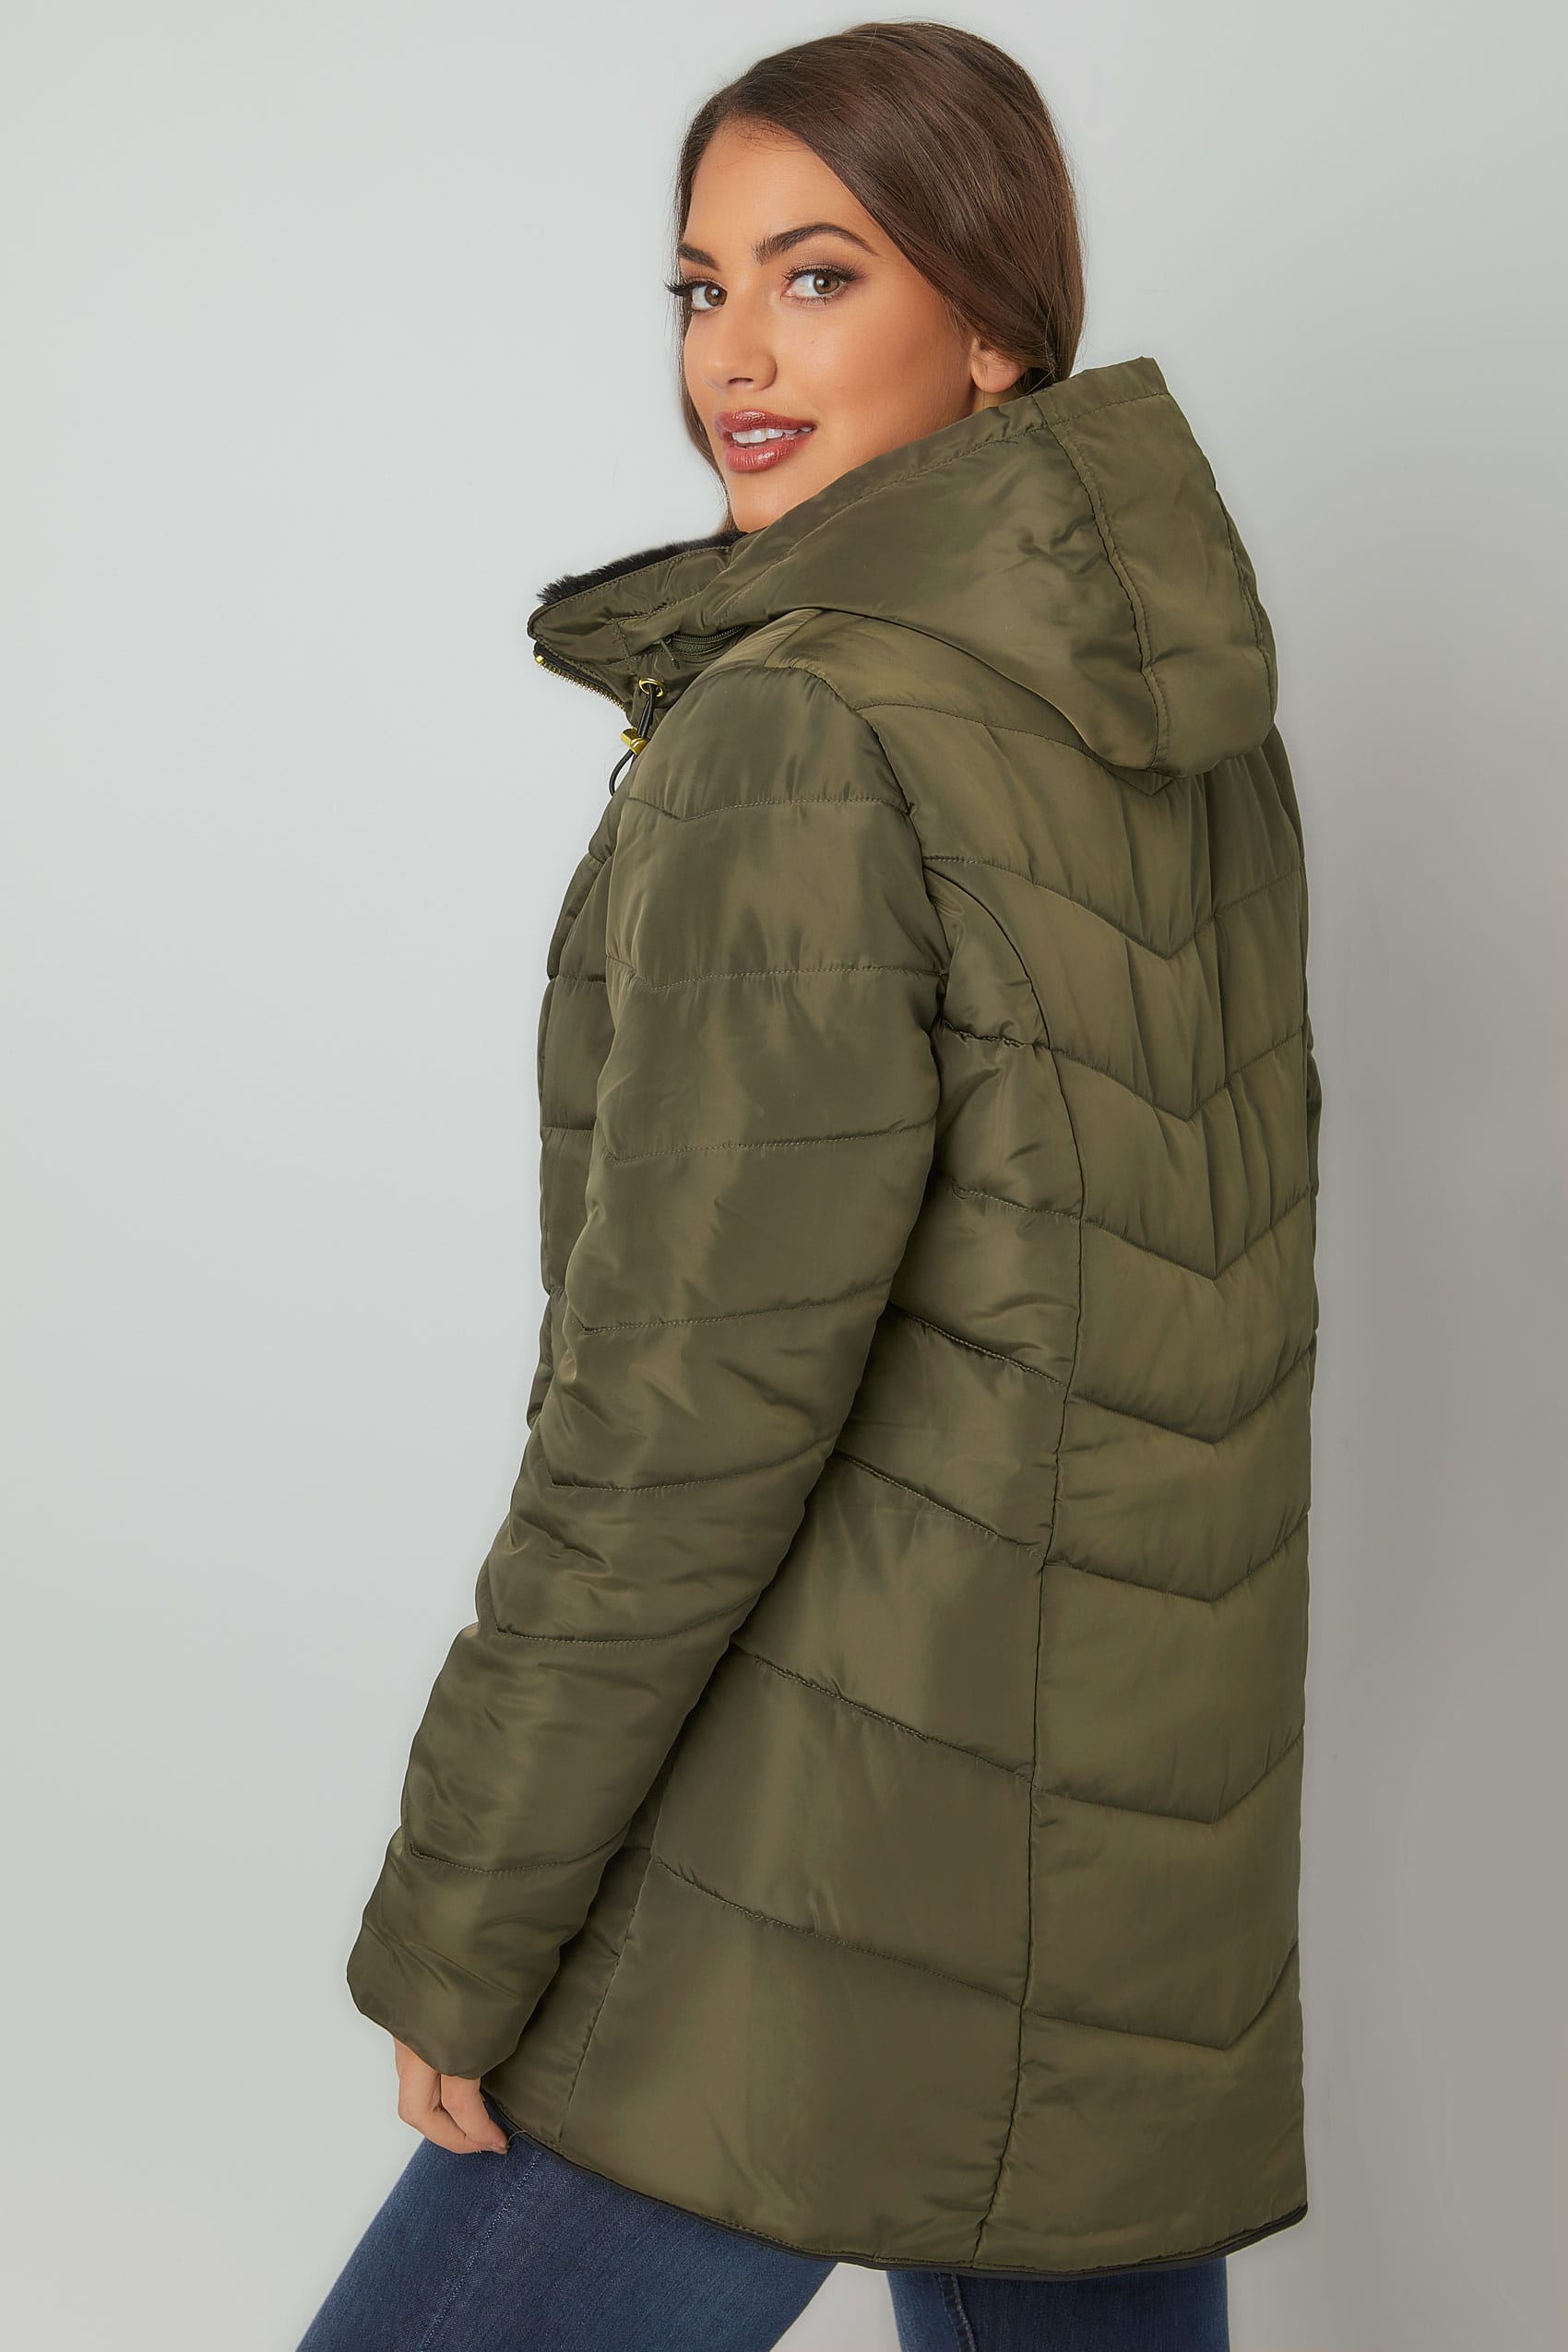 Khaki Short Quilted Puffer Jacket With Foldaway Hood, Plus size 16 to 32